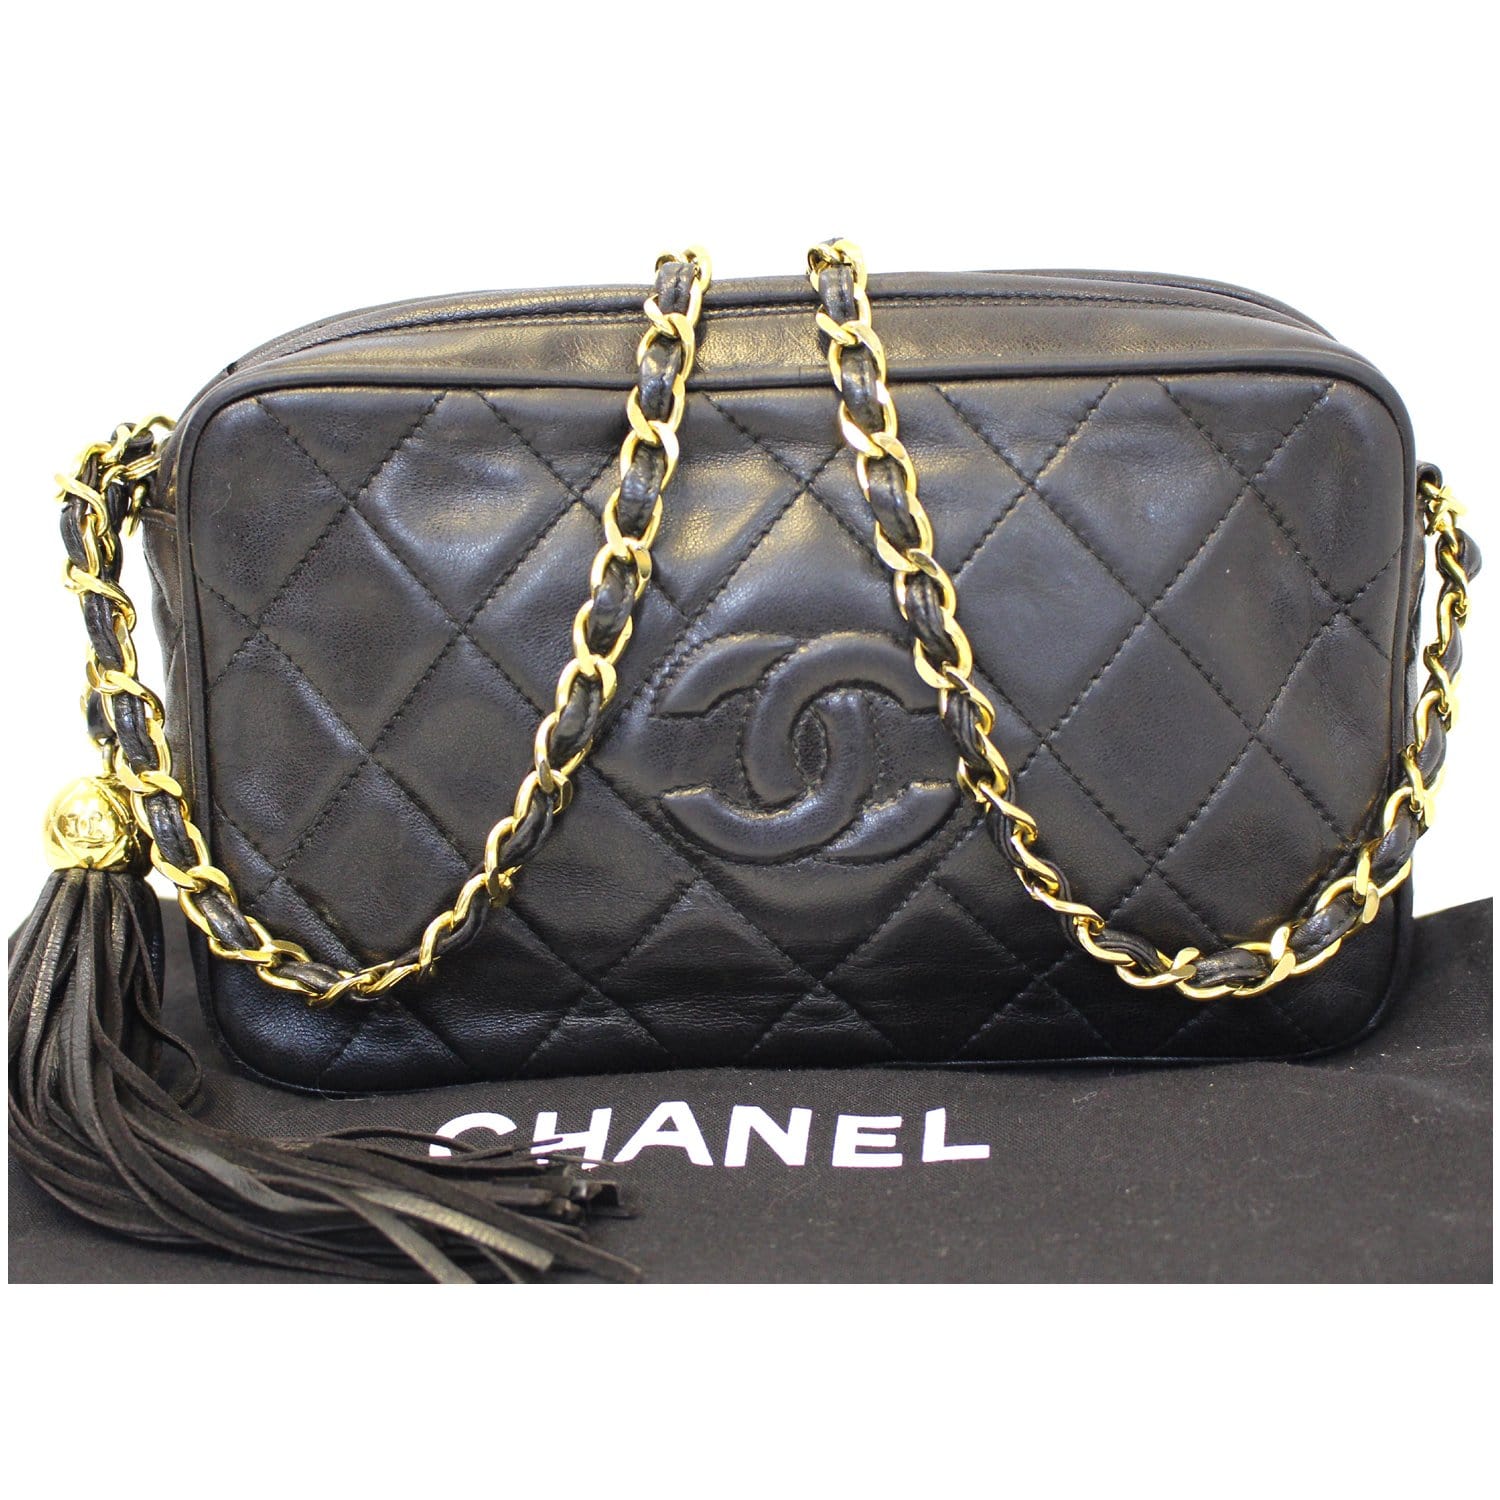 Chanel Black Quilted Leather Vintage CC Tassel Crossbody Bag Chanel